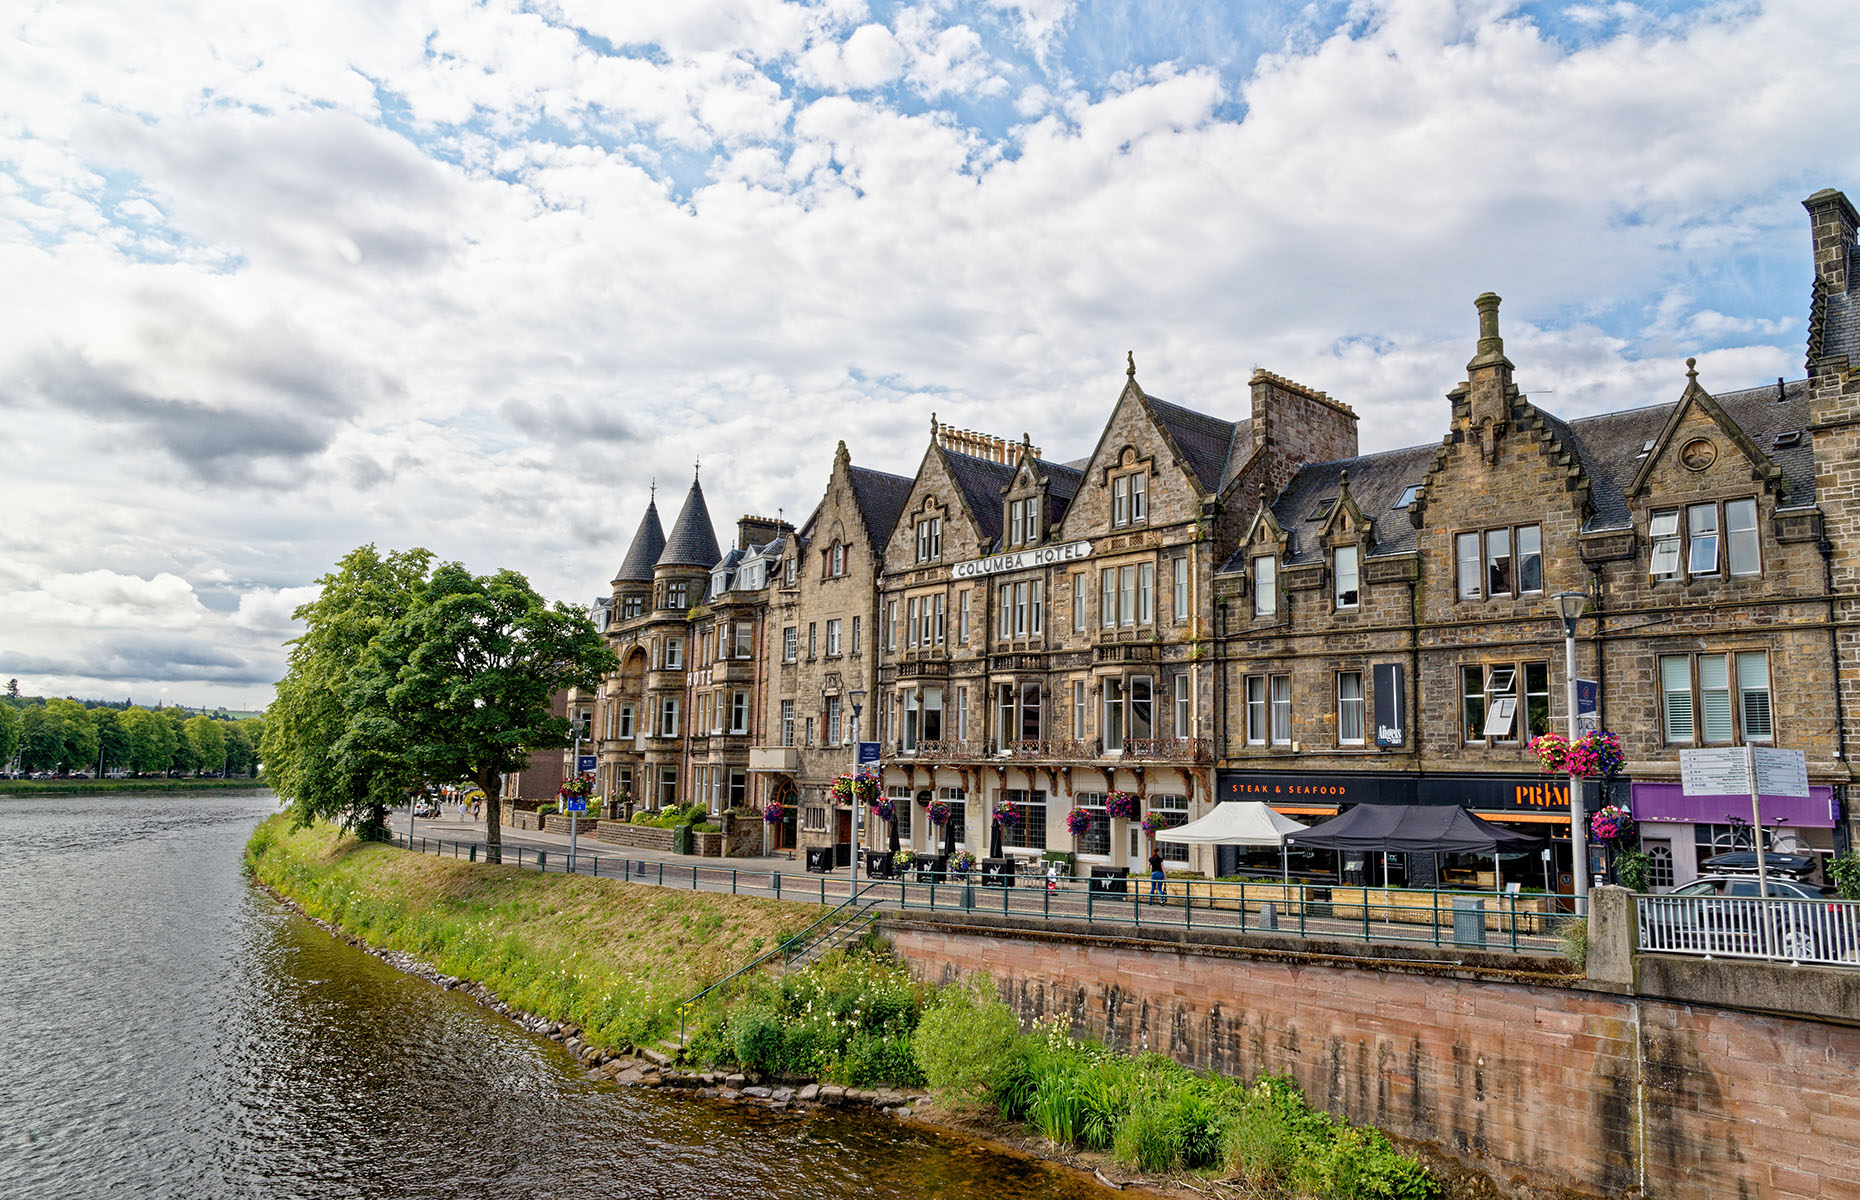 Best Western Inverness Palace Hotel, Inverness. (Image: Ion Mes/Shutterstock)